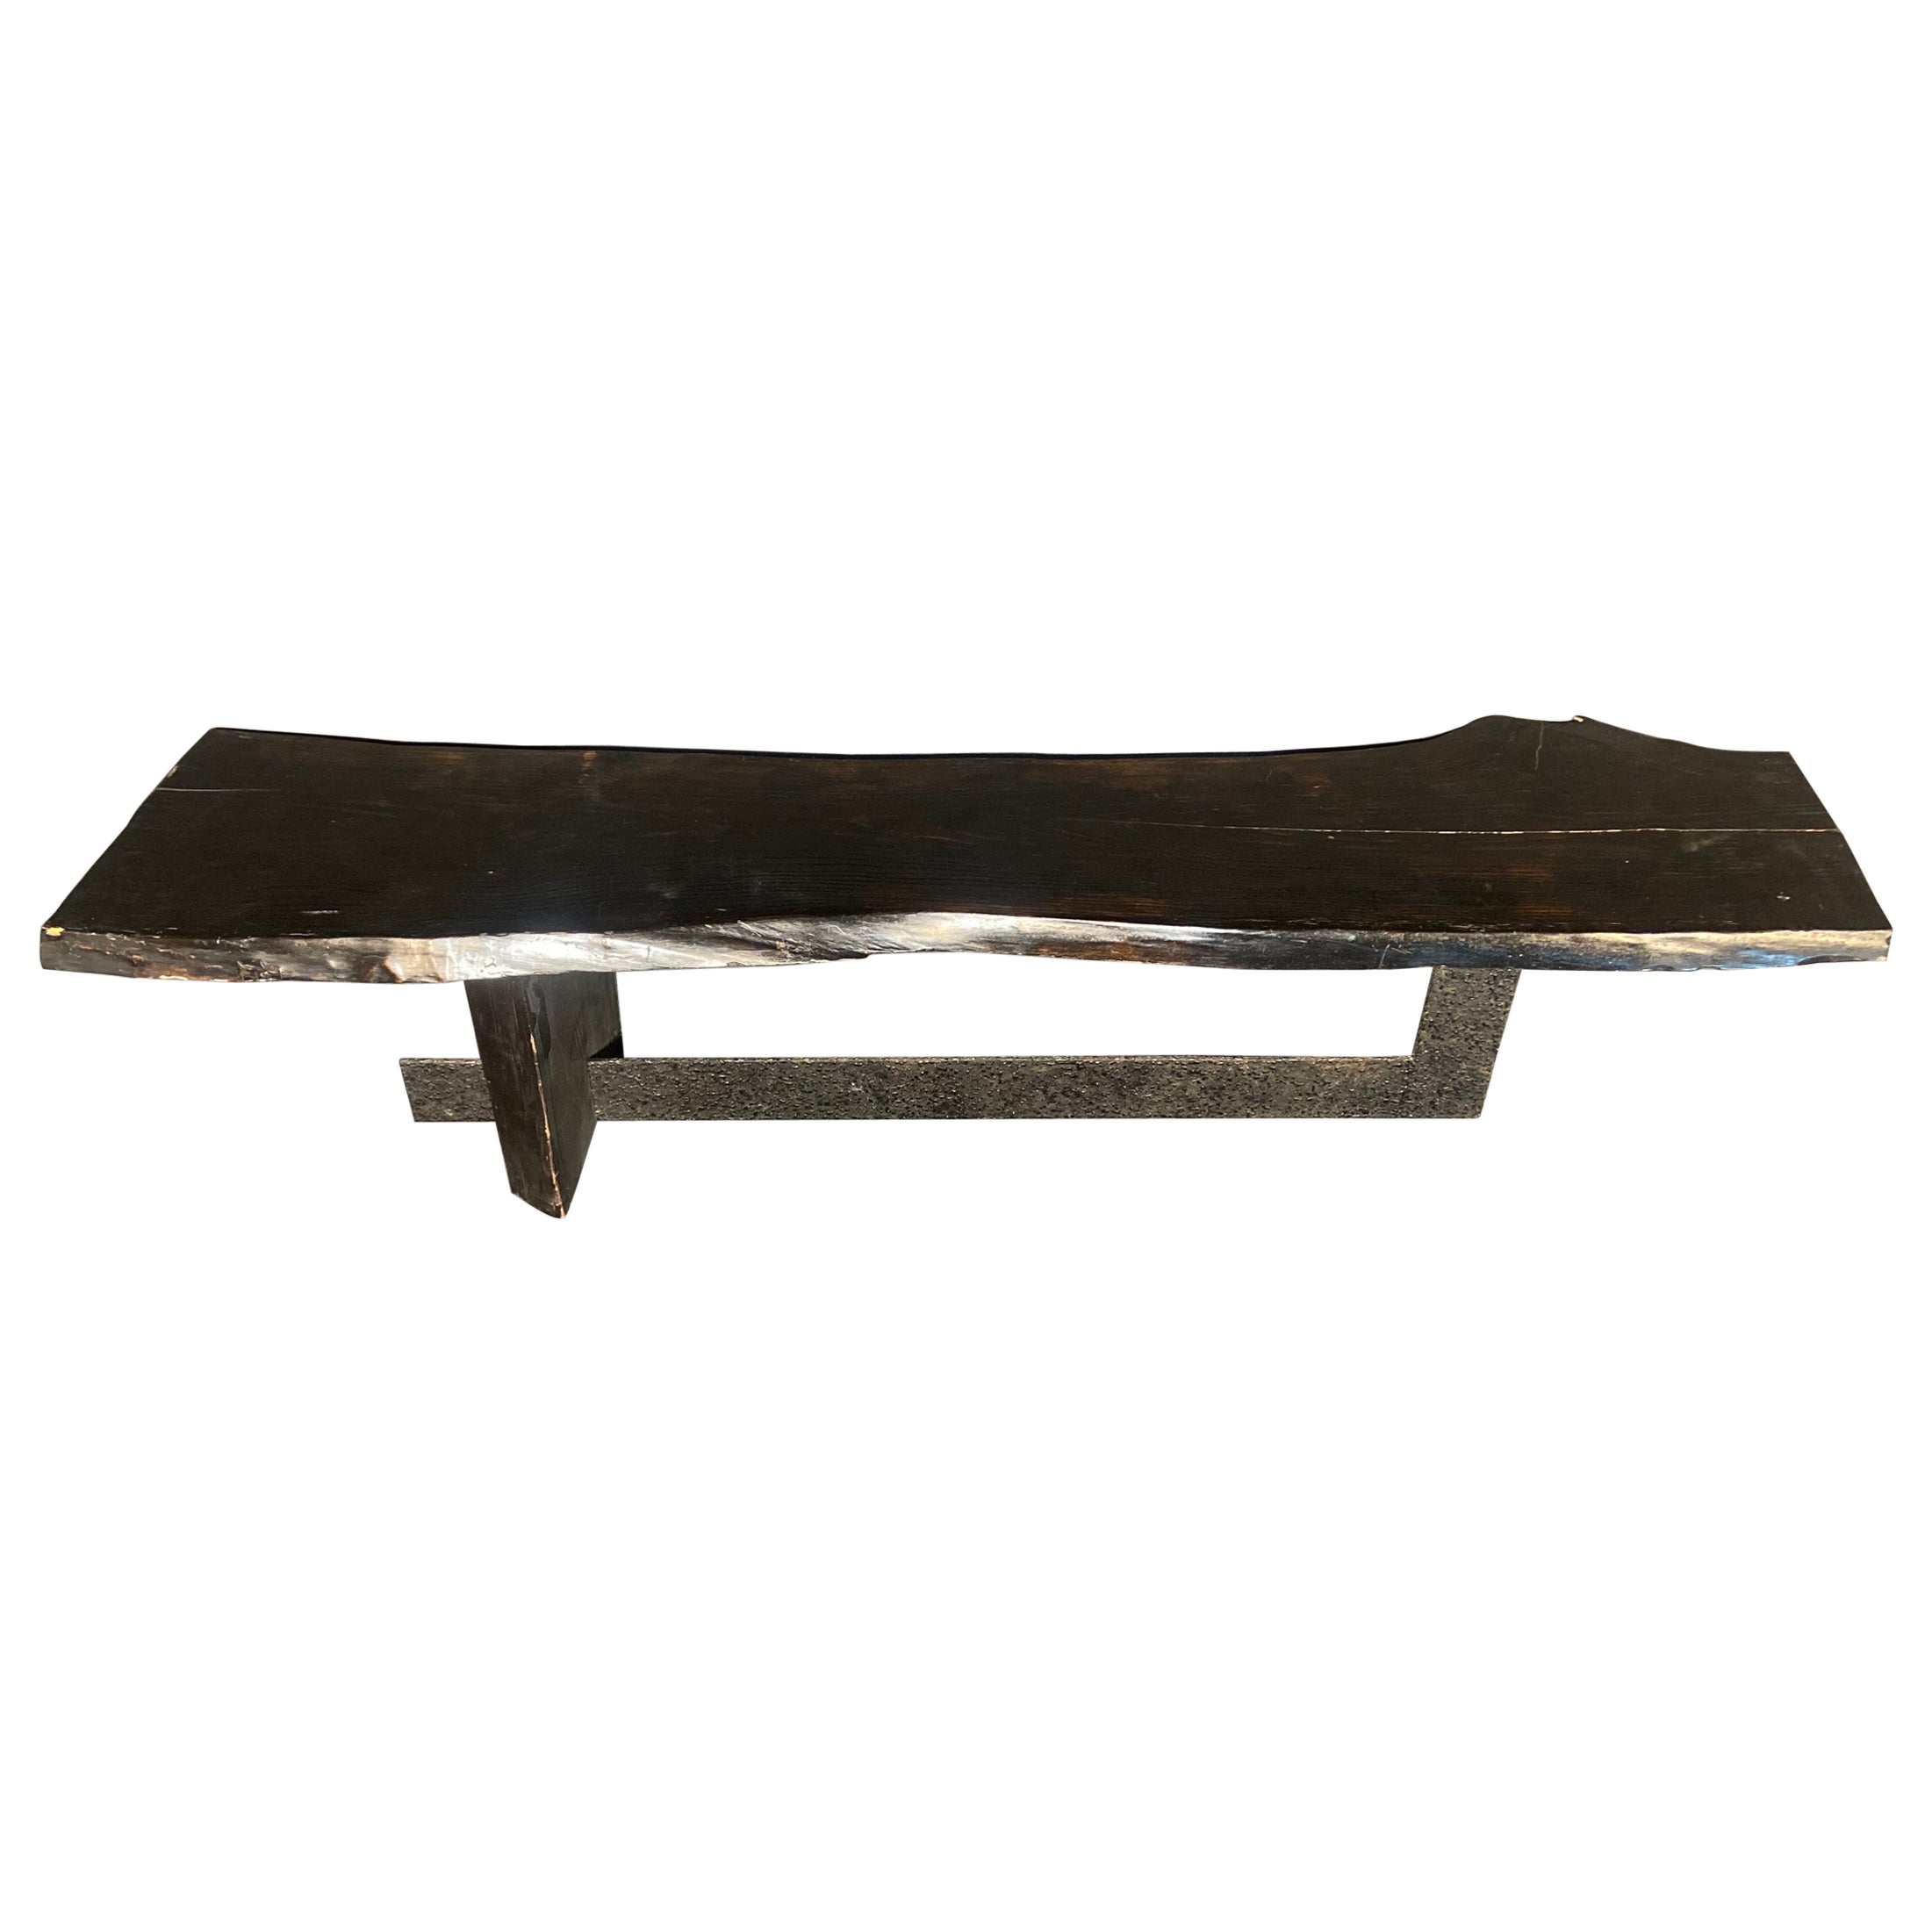 Vintage French Black Wooden Bench Raised on Metal Feet Brutalist Period For Sale